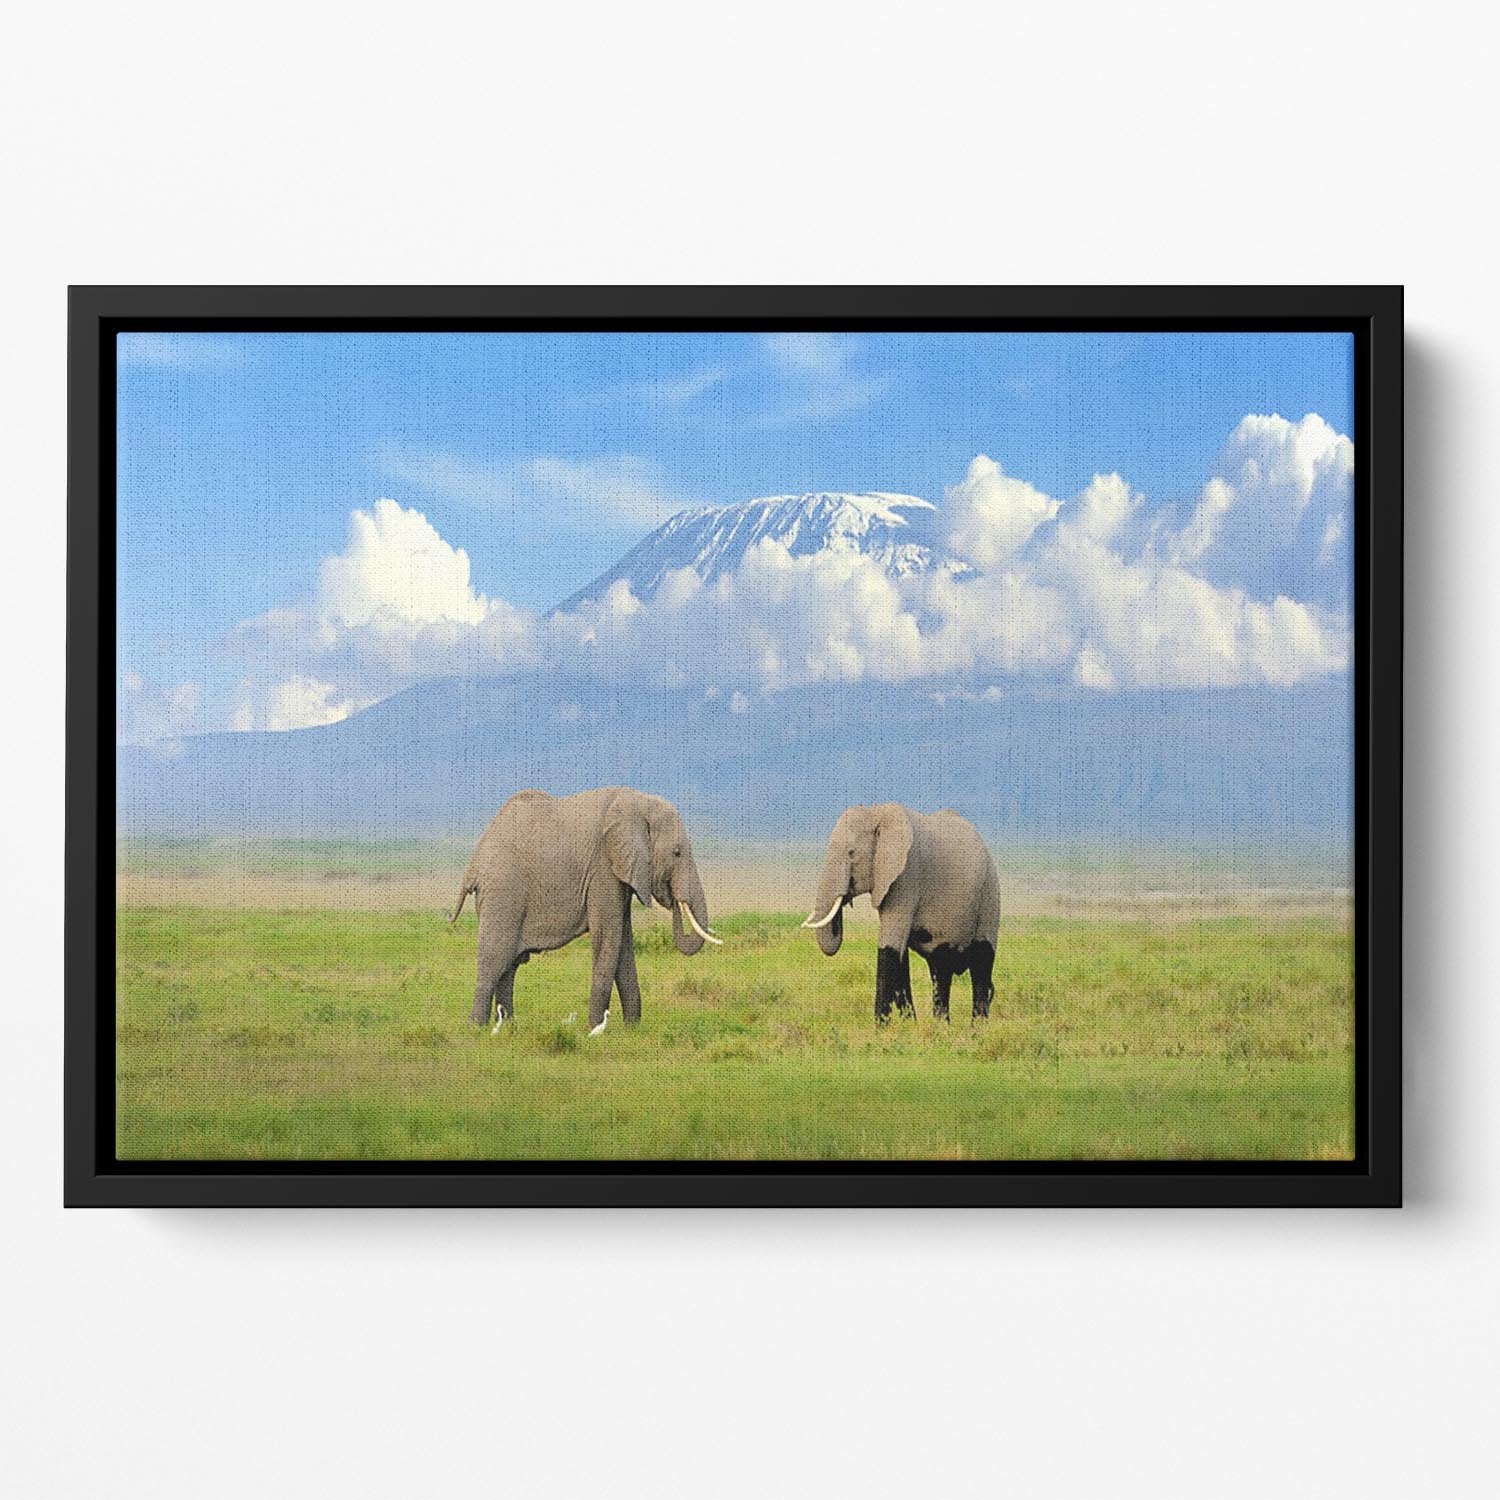 Elephant with Mount Kilimanjaro in the background Floating Framed Canvas - Canvas Art Rocks - 2